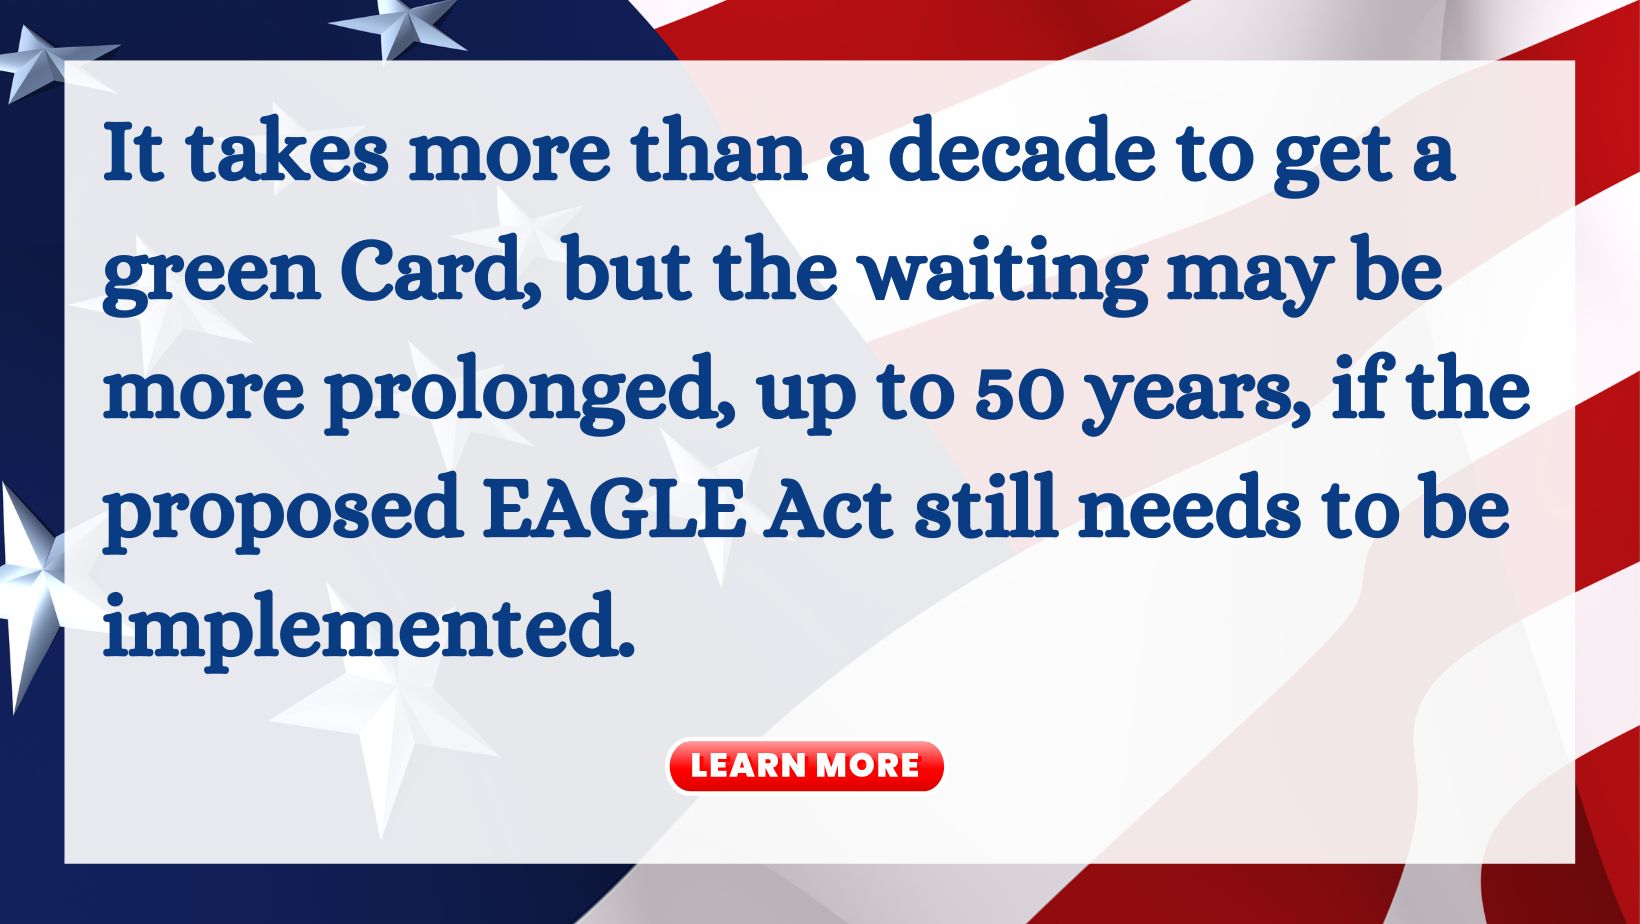 The proposed EAGLE Act and the support to pass the bill